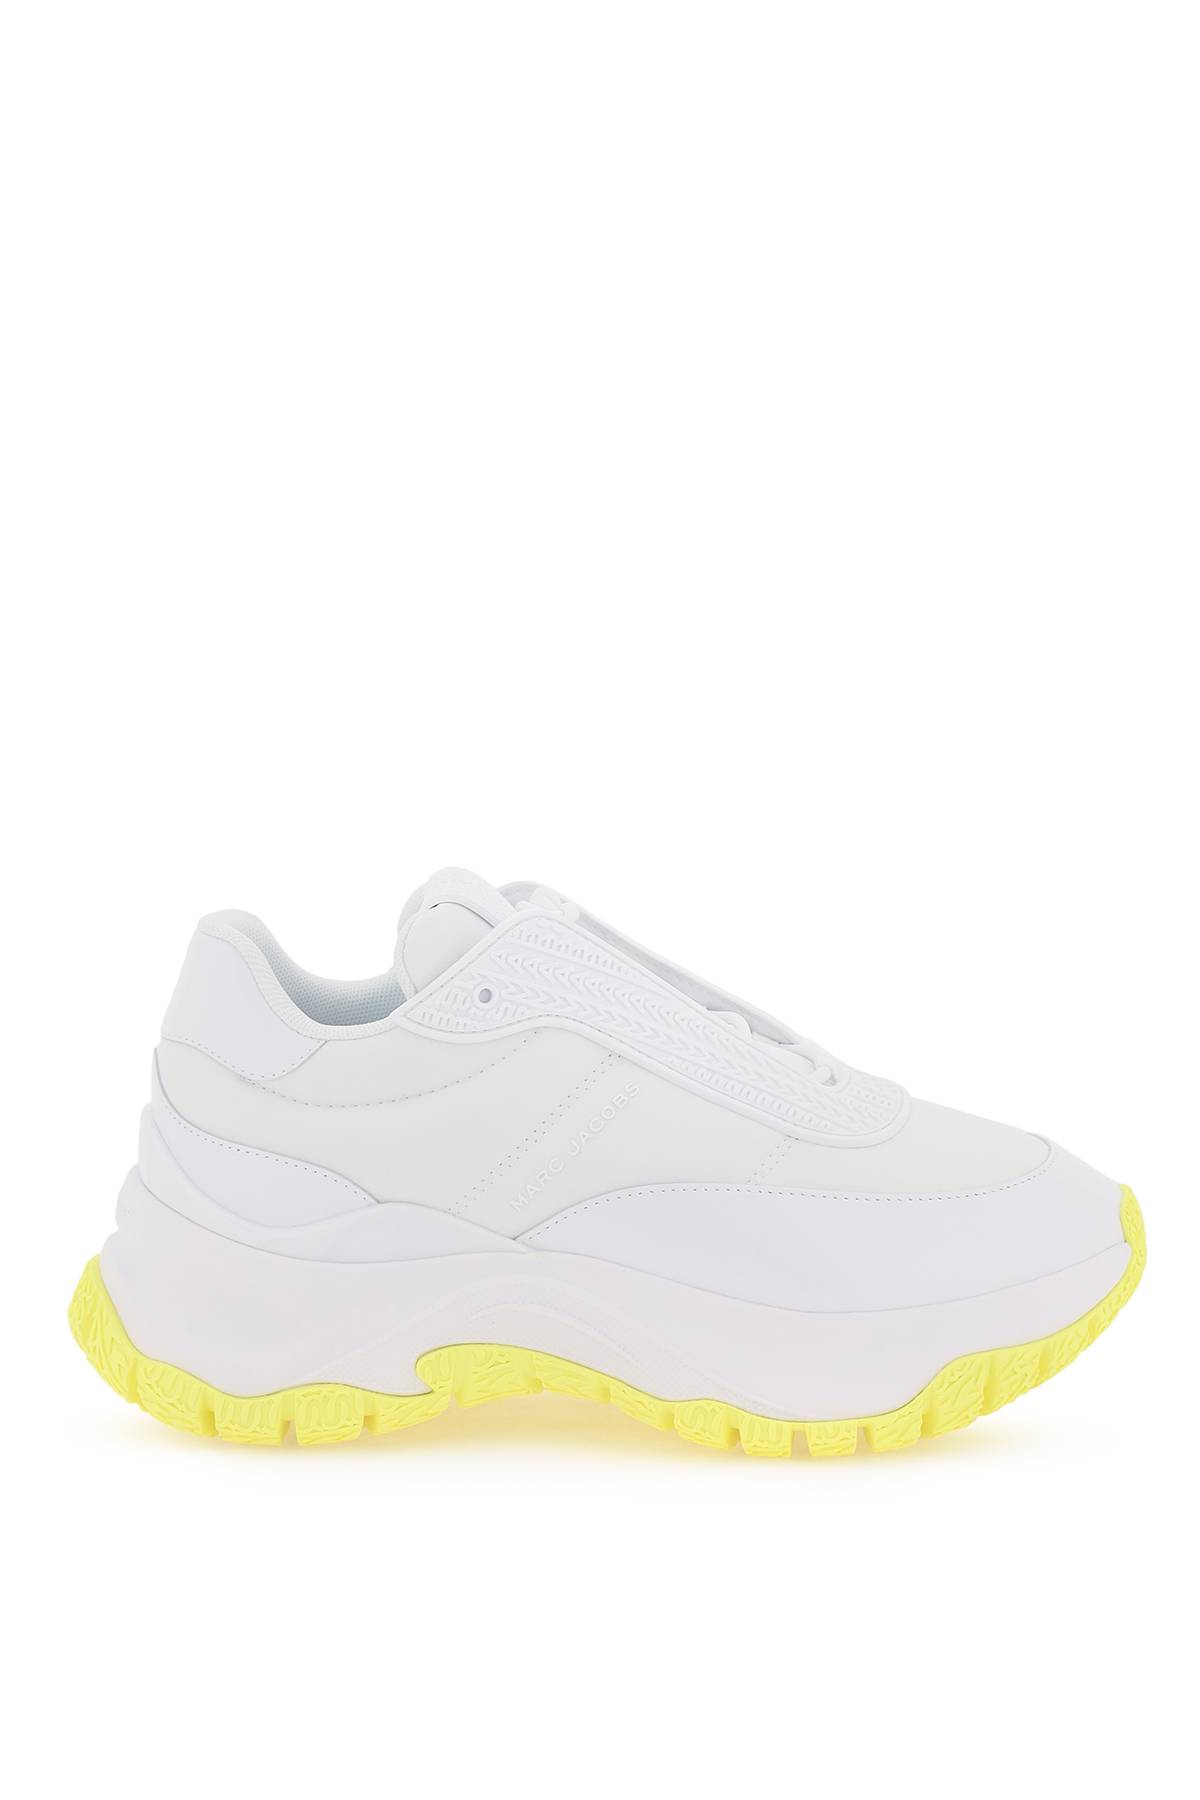 Marc Jacobs MARC JACOBS the lazy runner sneakers